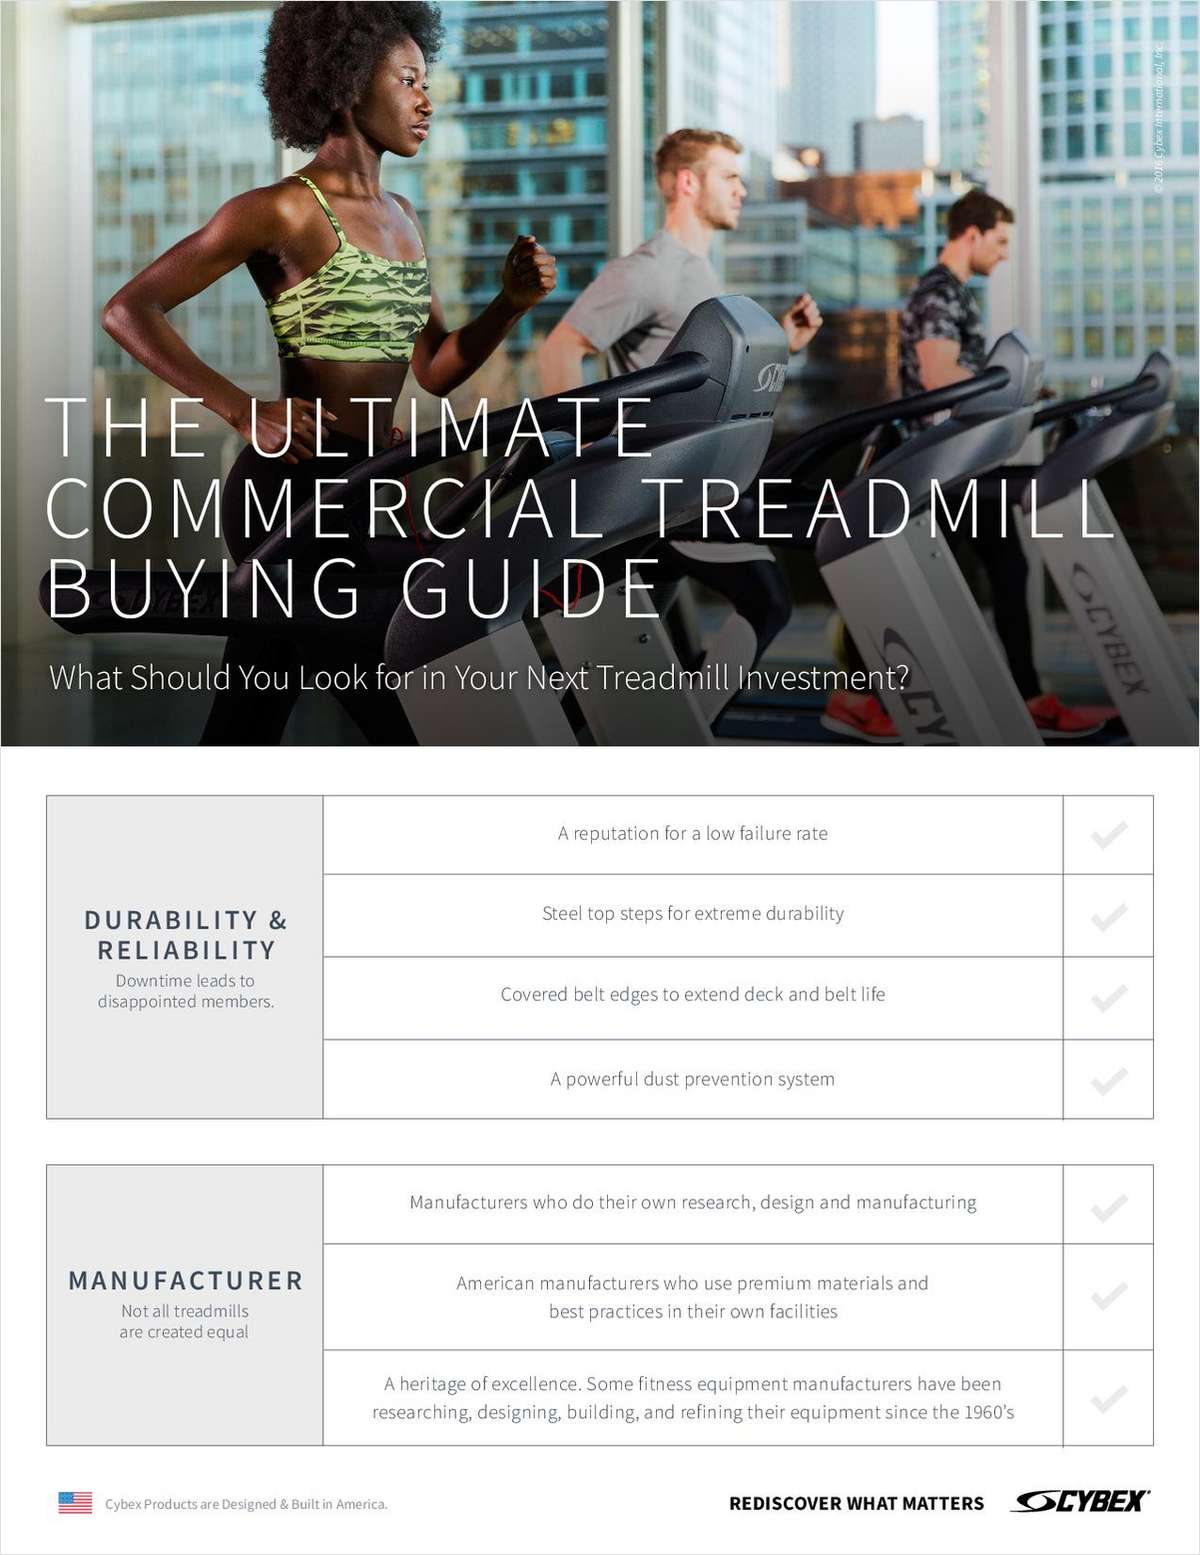 The Ultimate Commercial Treadmill Buying Guide